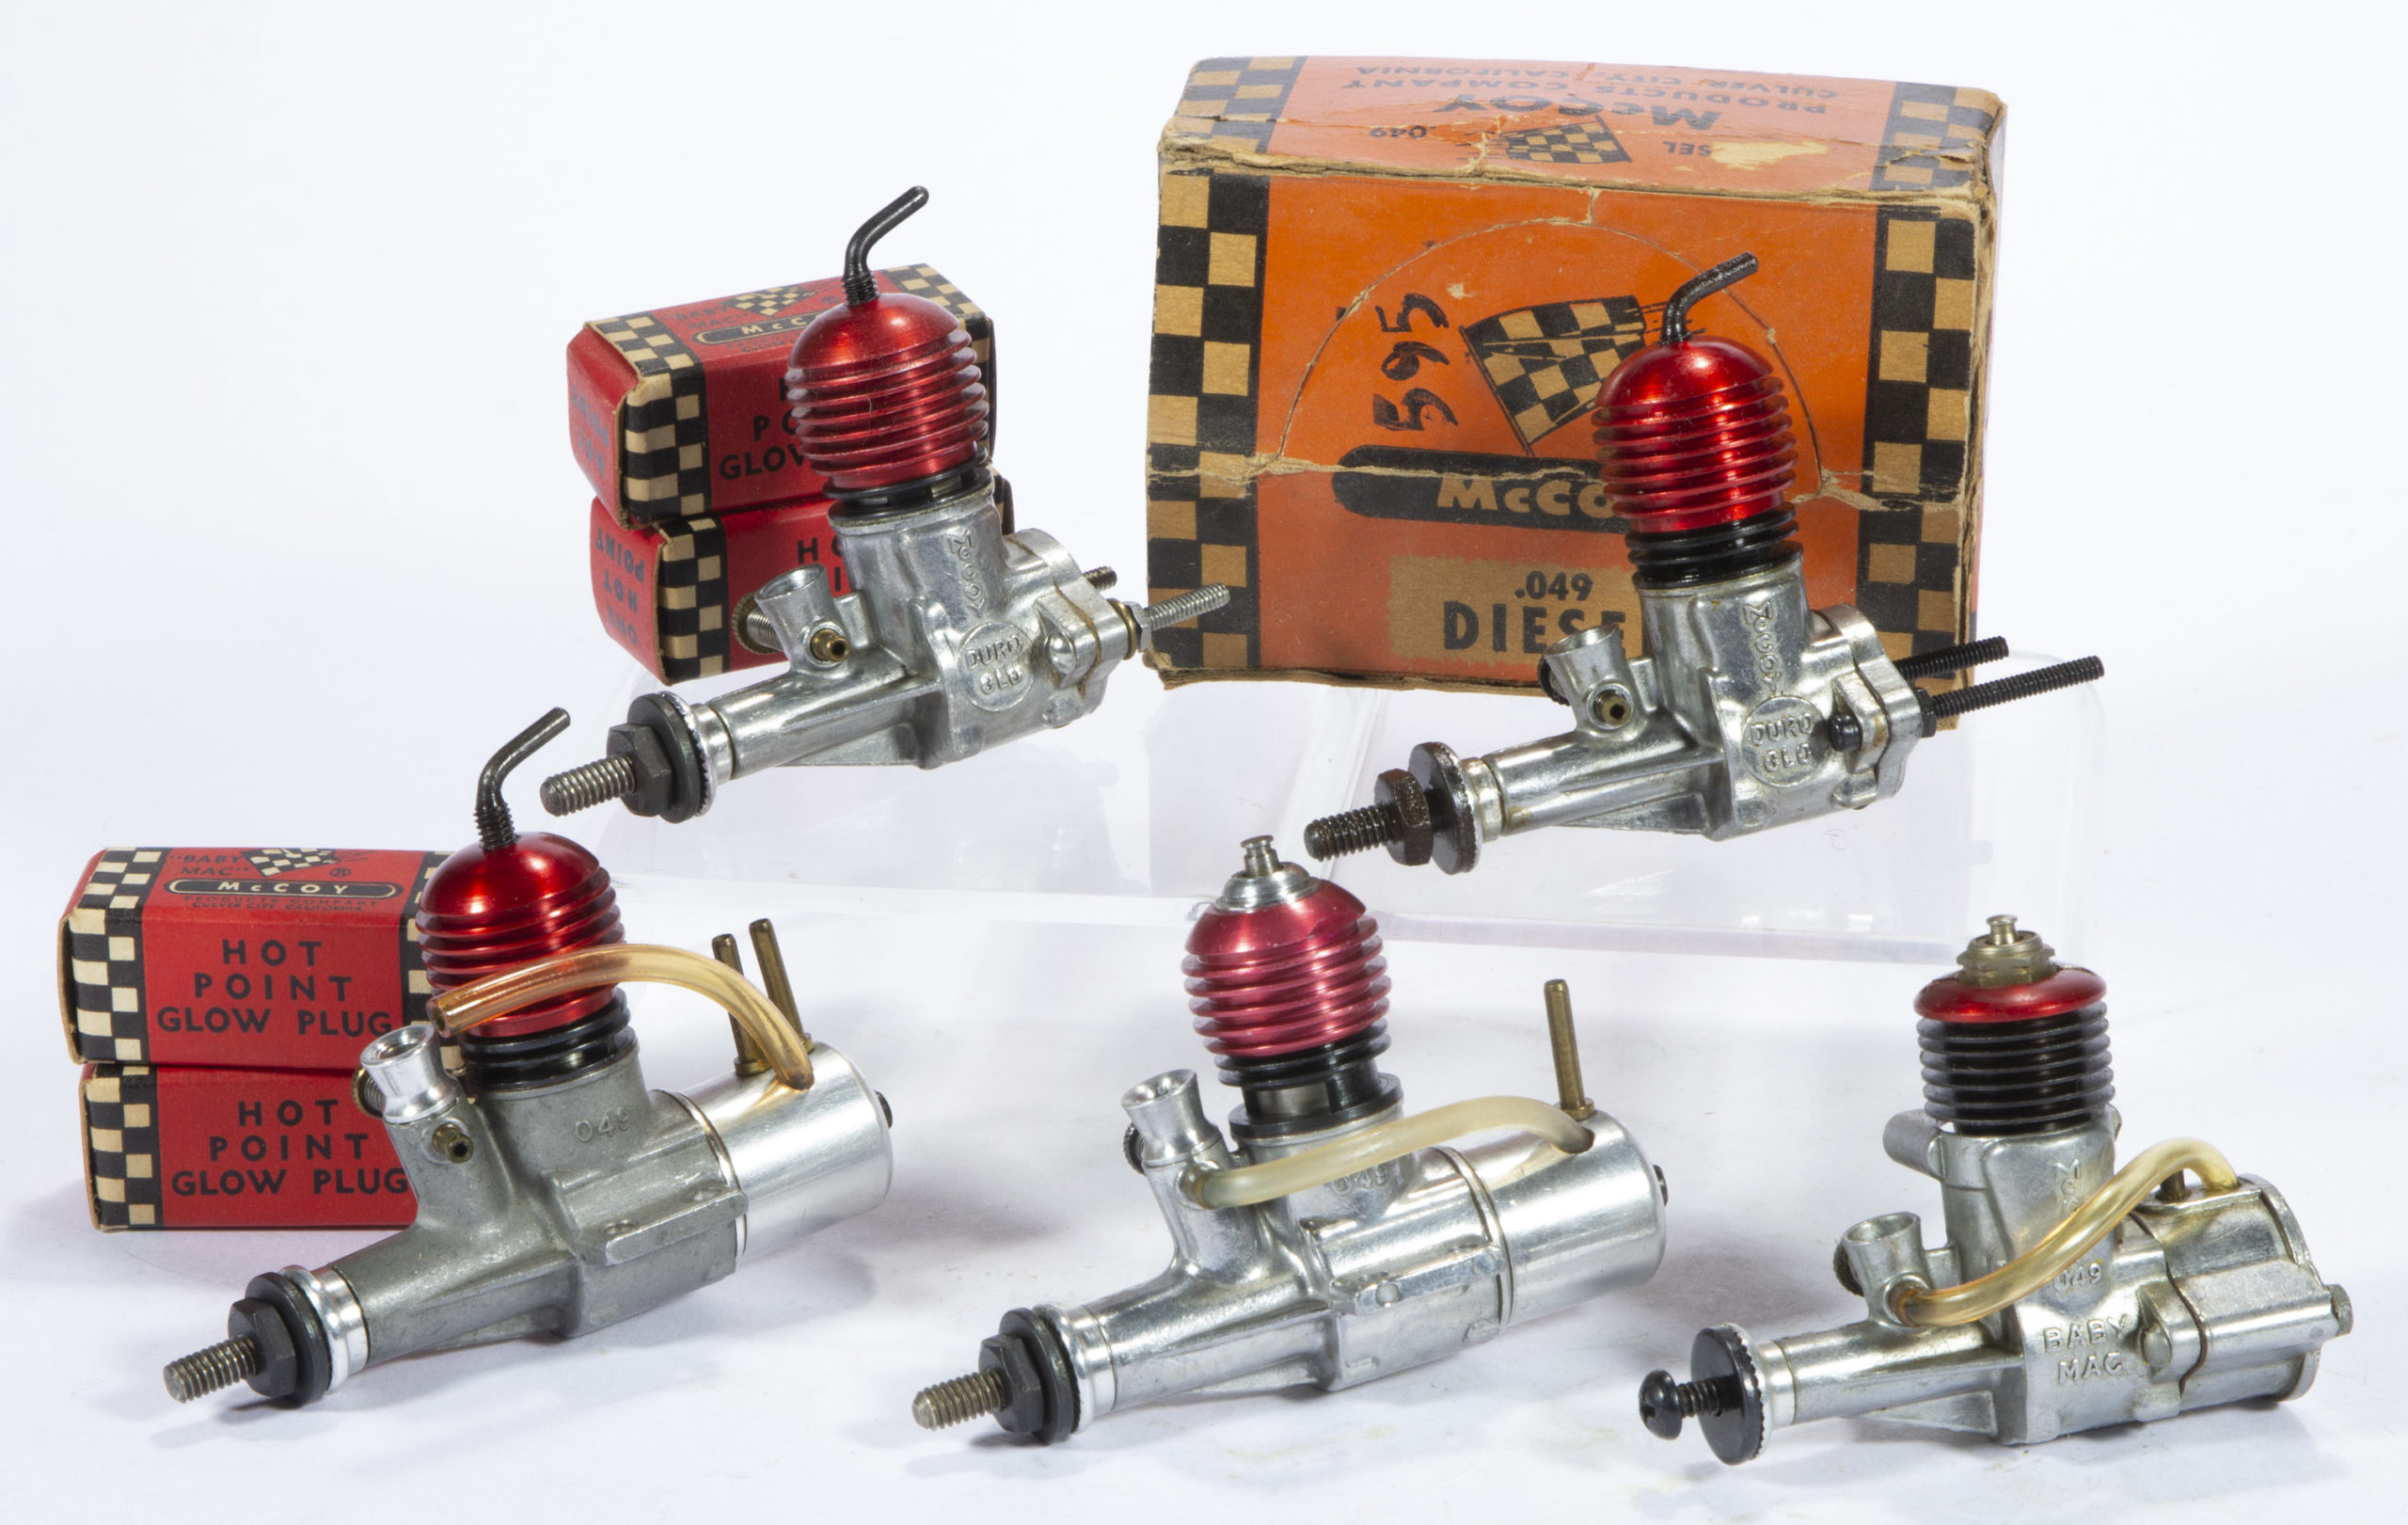 DURO-MATIC / MCCOY PRODUCTS CO. “MCCOY” ASSORTED DIESEL AND GLOW PLUG MODEL AIRPLANE ENGINES AND PARTS, LOT OF APPROXIMATELY 17,